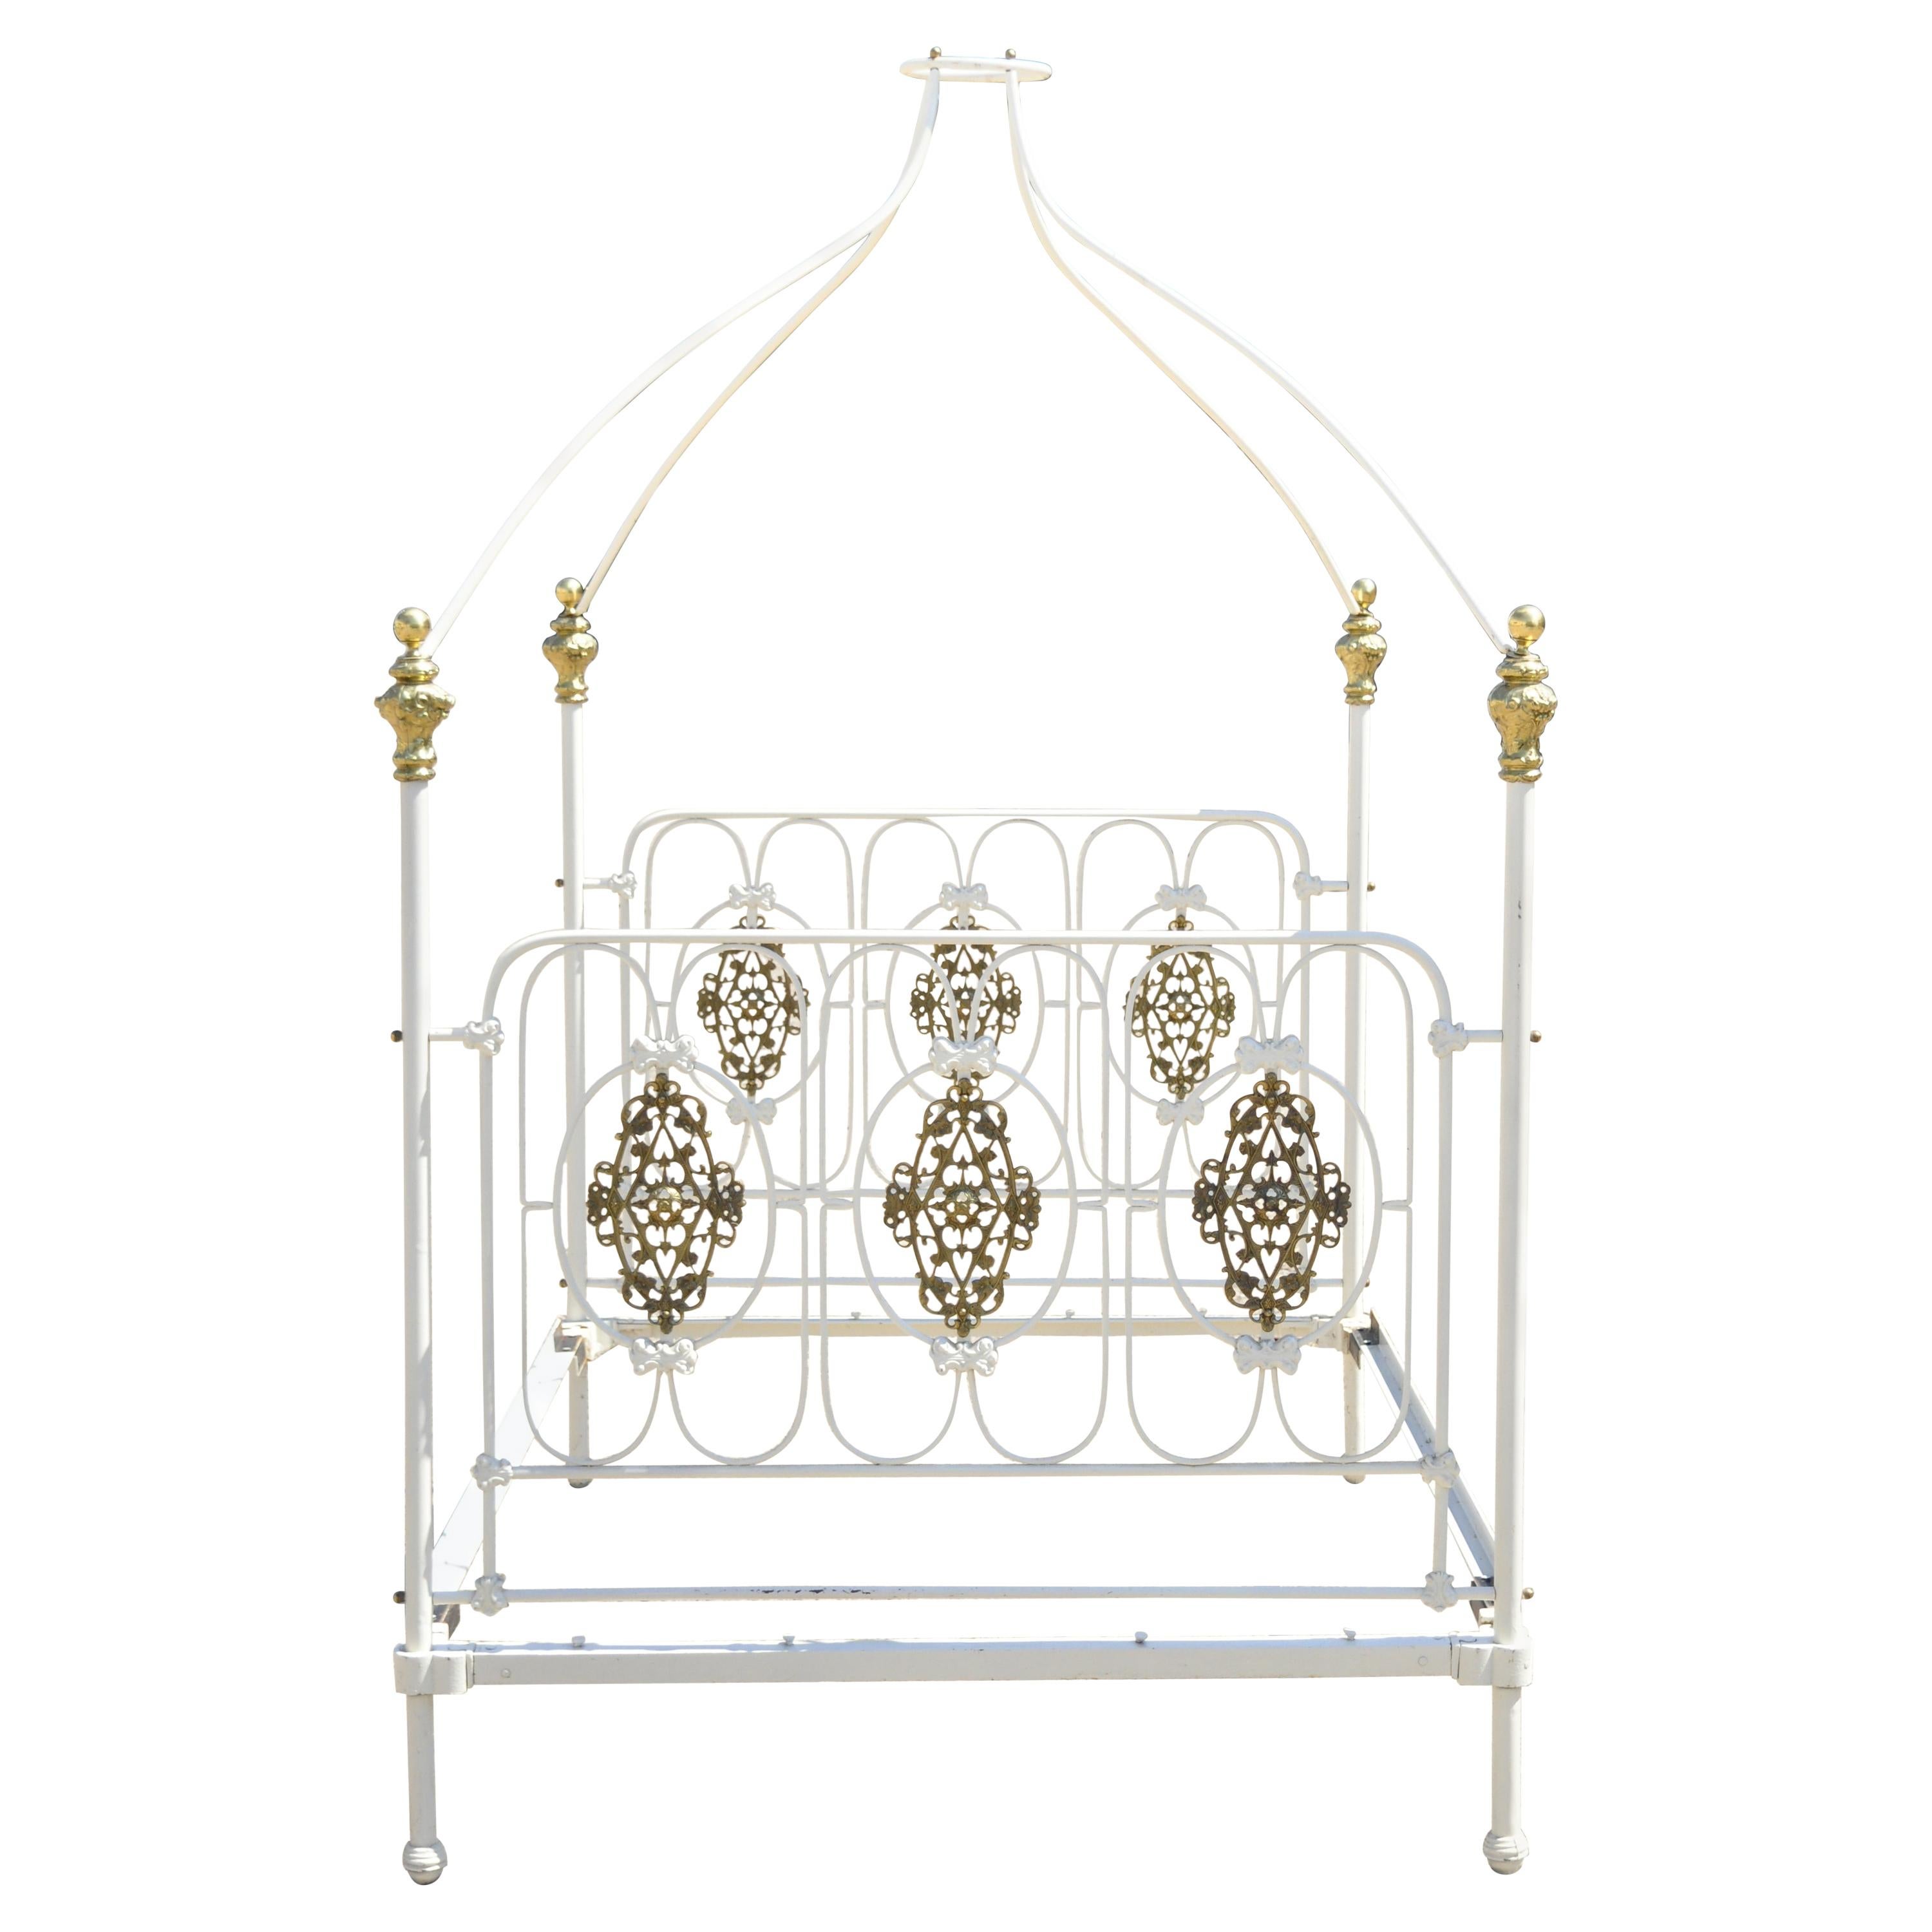 Vintage Wrought Iron Brass French Victorian Full Size Poster Bed Frame w/ Canopy